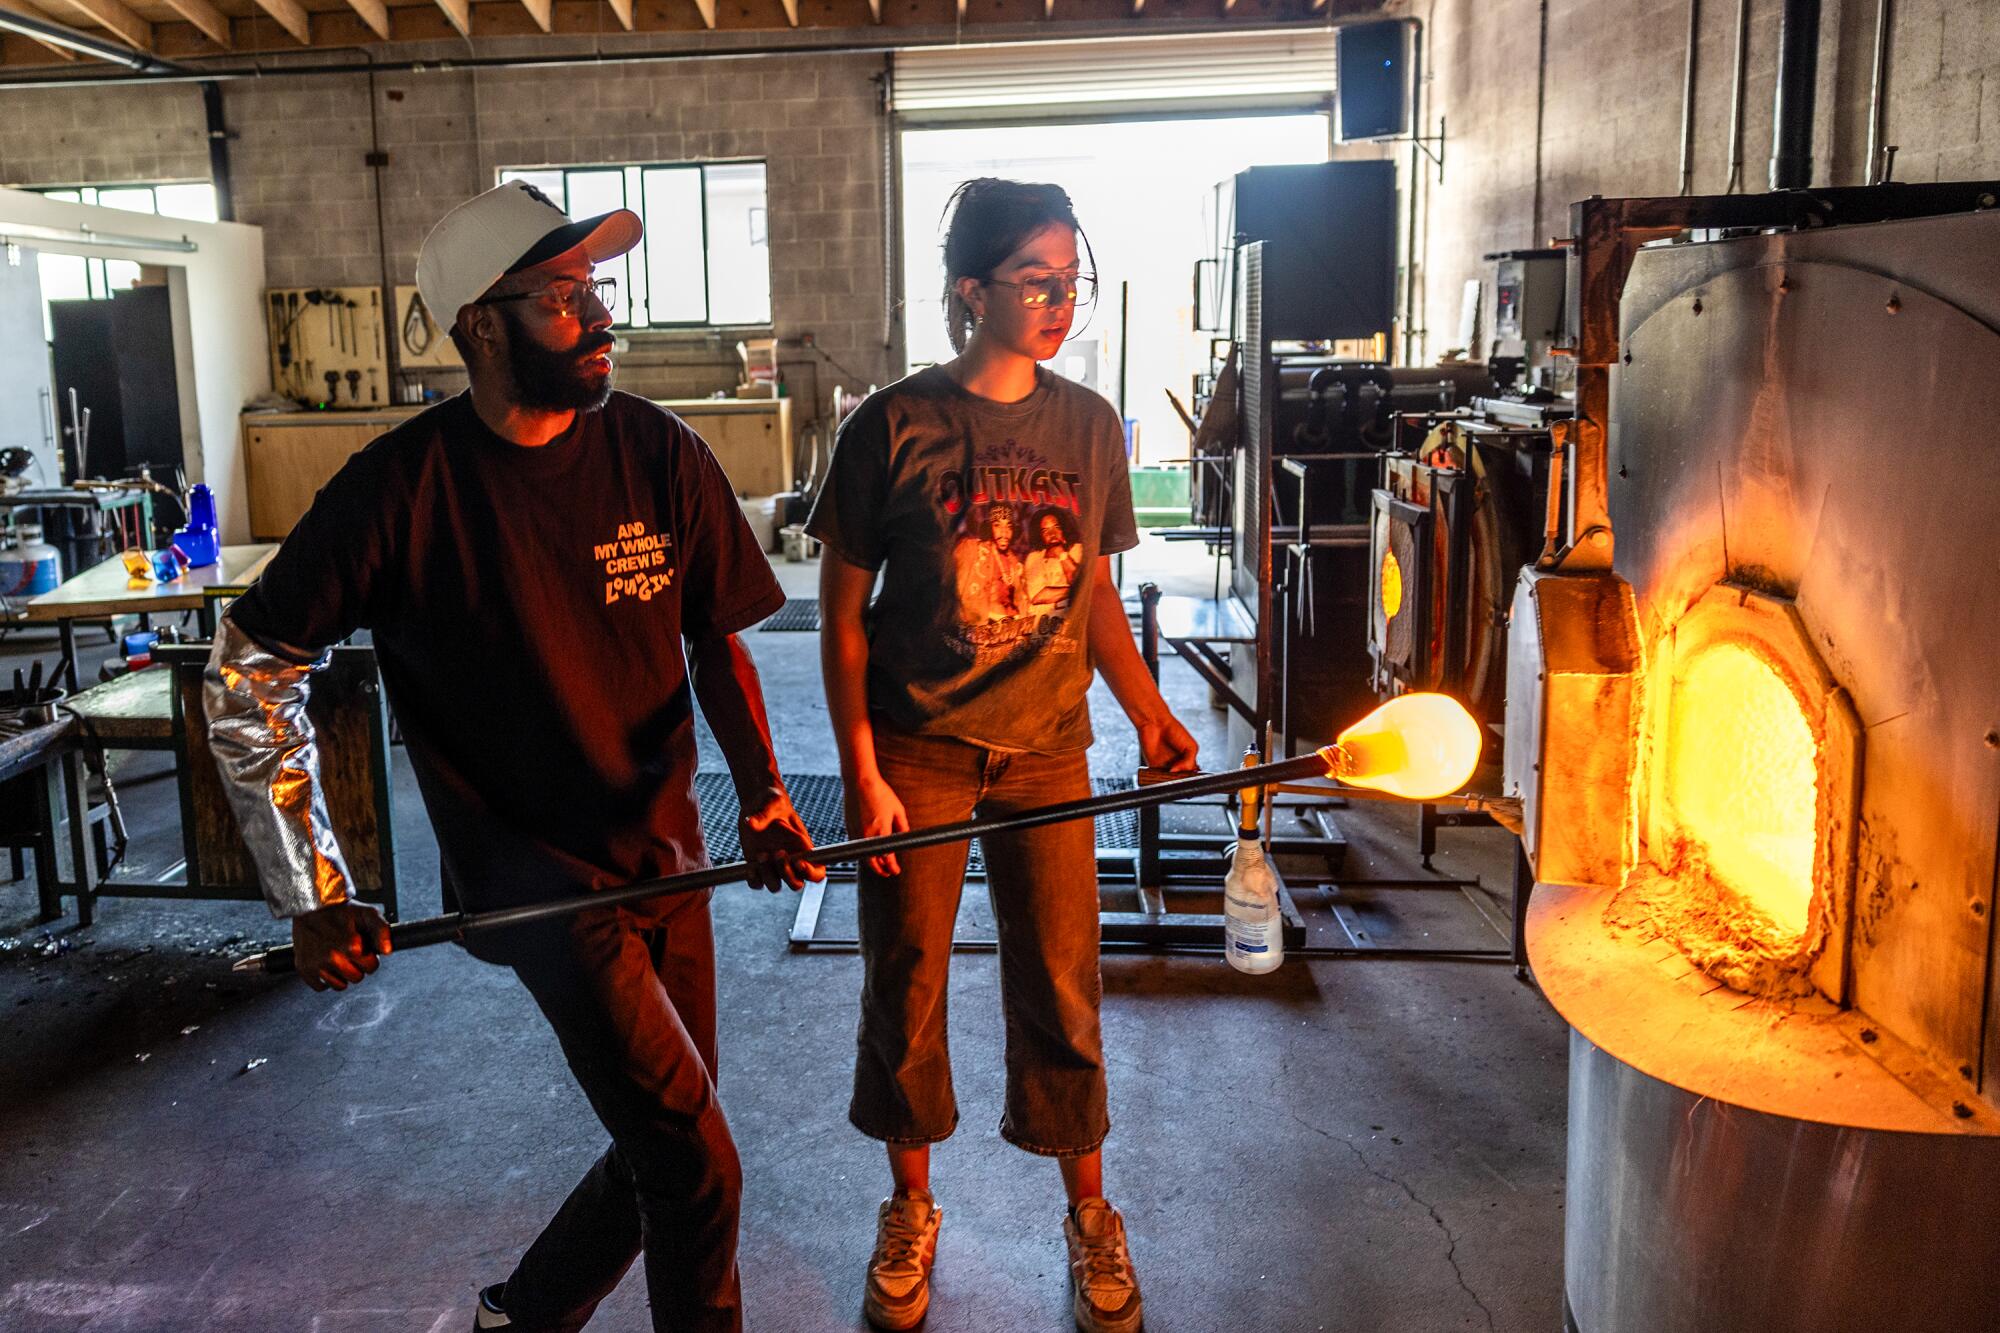 Assistant glassblower Sara Roller watches as glassblower Cedric Mitchell removes glass from a furnace.